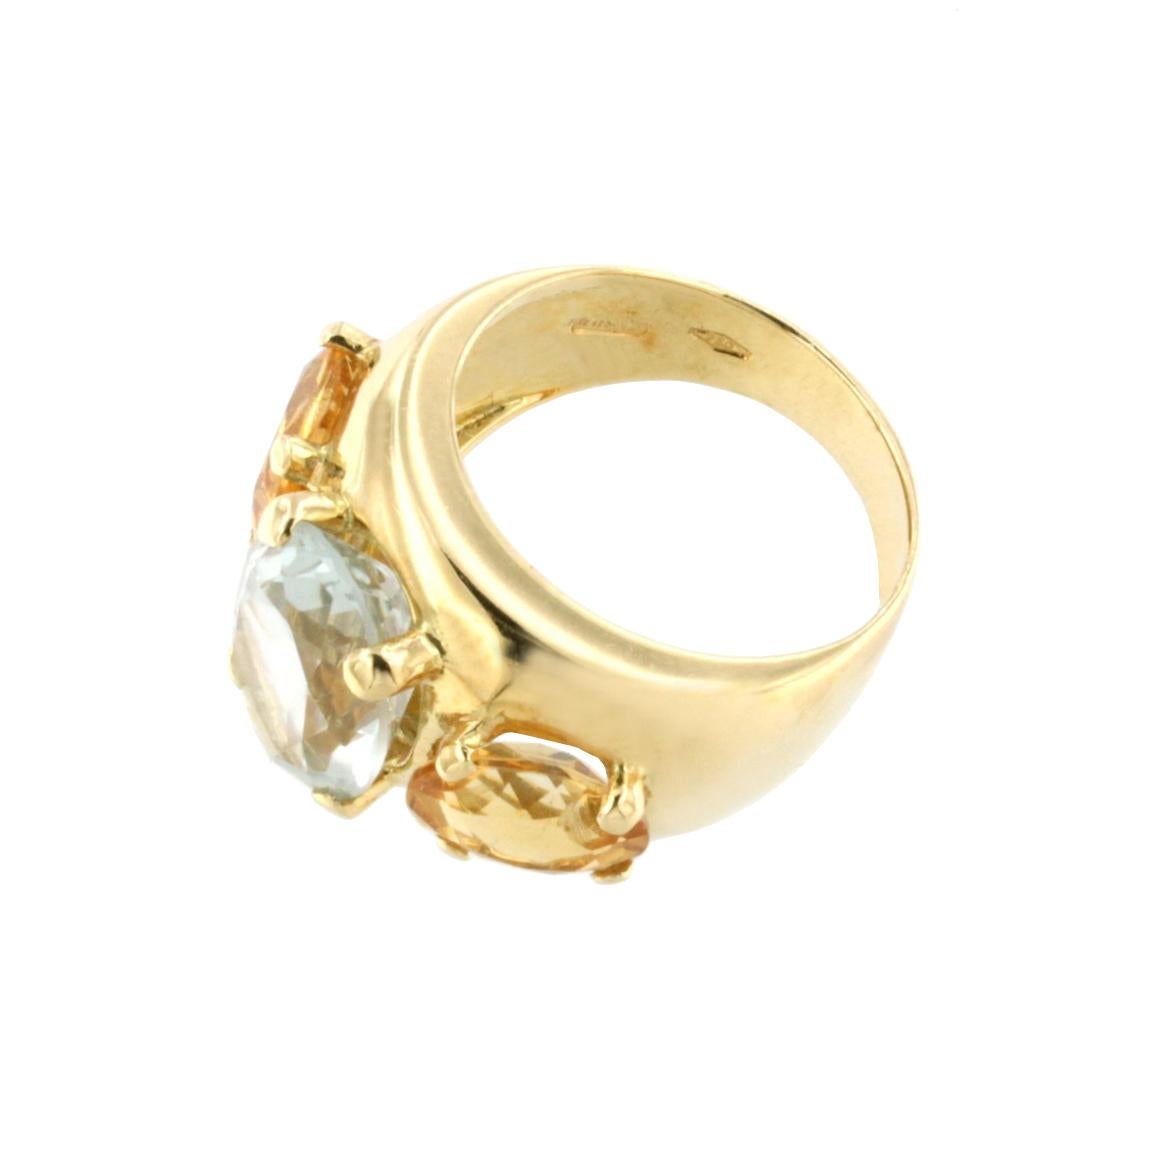  Combination of shapes and colors made a unique fashion and modern ring in 18k rose gold with colored stones. Made in Italy by Stanoppi Jewellery since 1948.
Ring in 18k yellow gold with Blue Topaz (oval cut, size: 12x10 mm) and Citrine (oval cut,